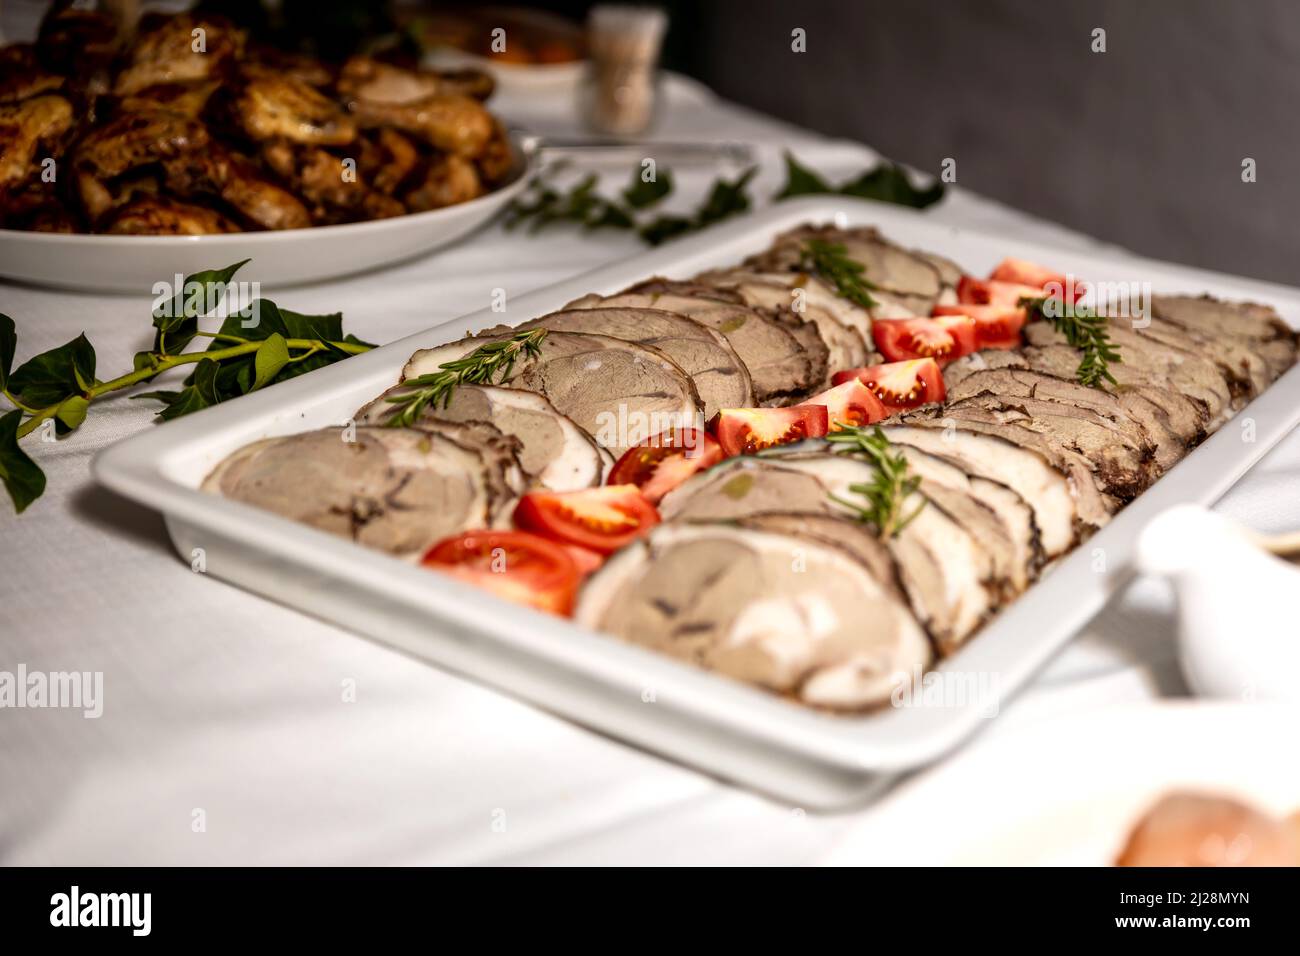 Roasted Meat Cold Cut Slices On A White Platter Stock Photo Alamy